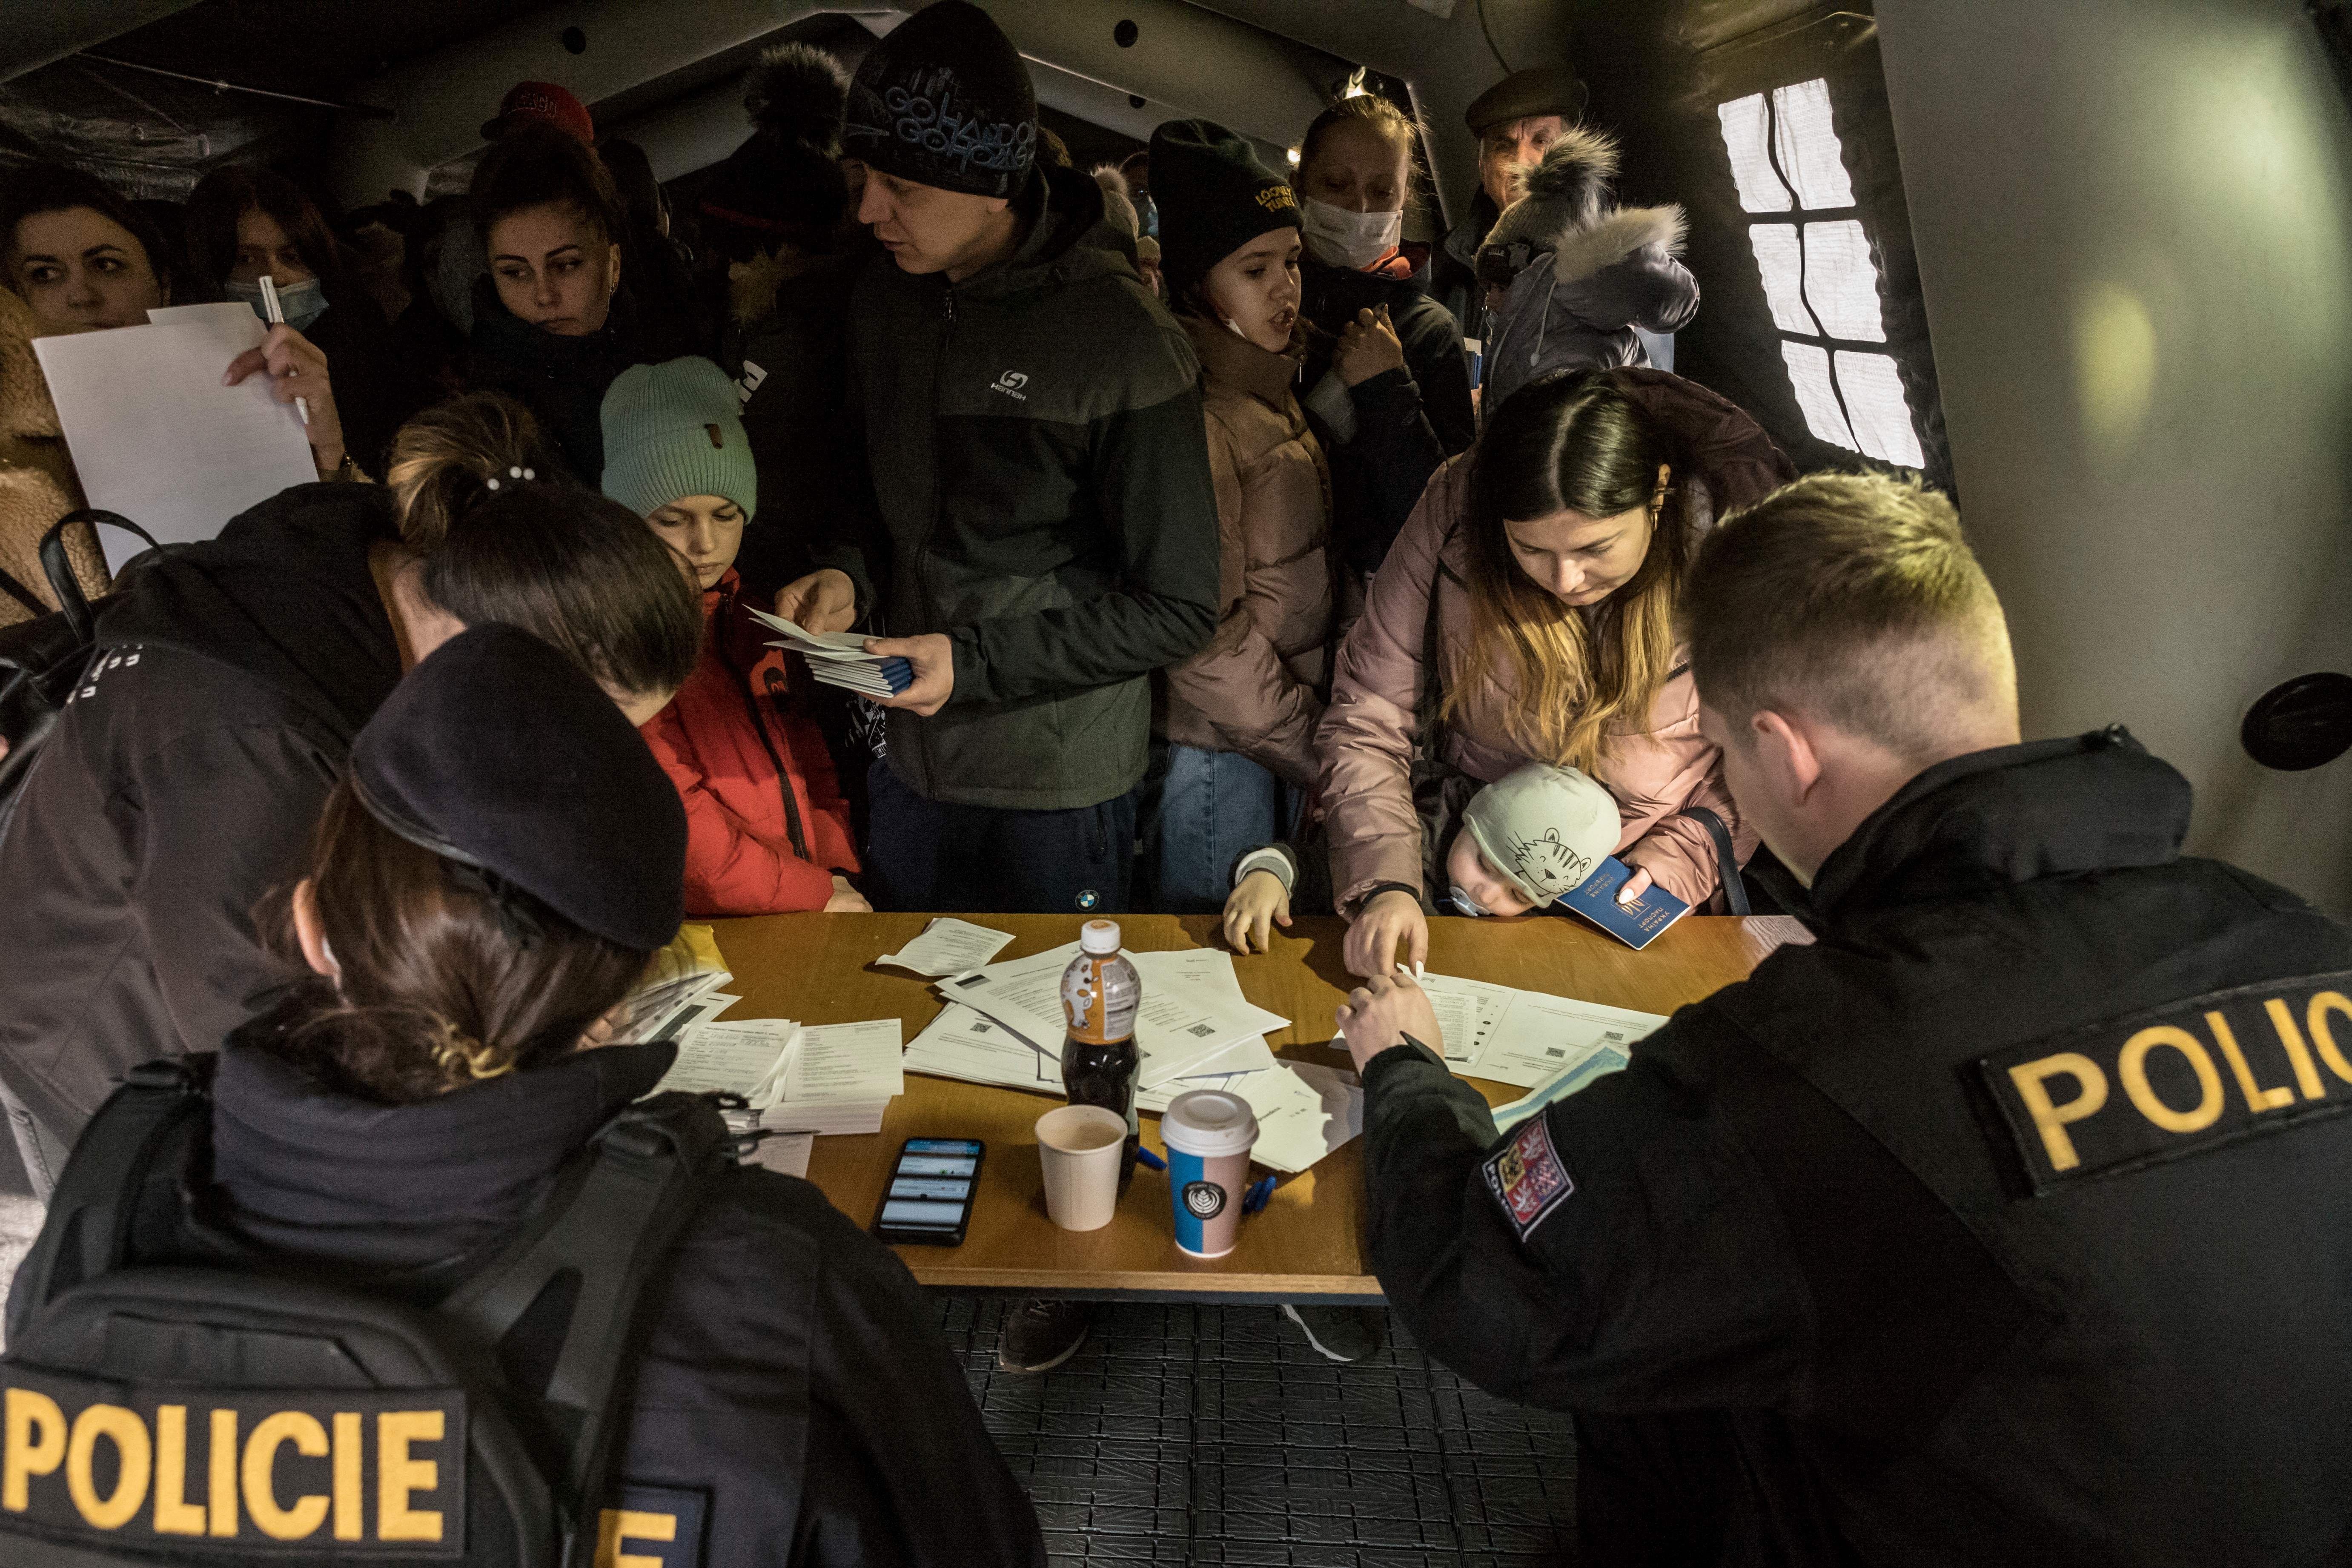 Photo of people crowded into a tent and standing before two police officers with documents on the table